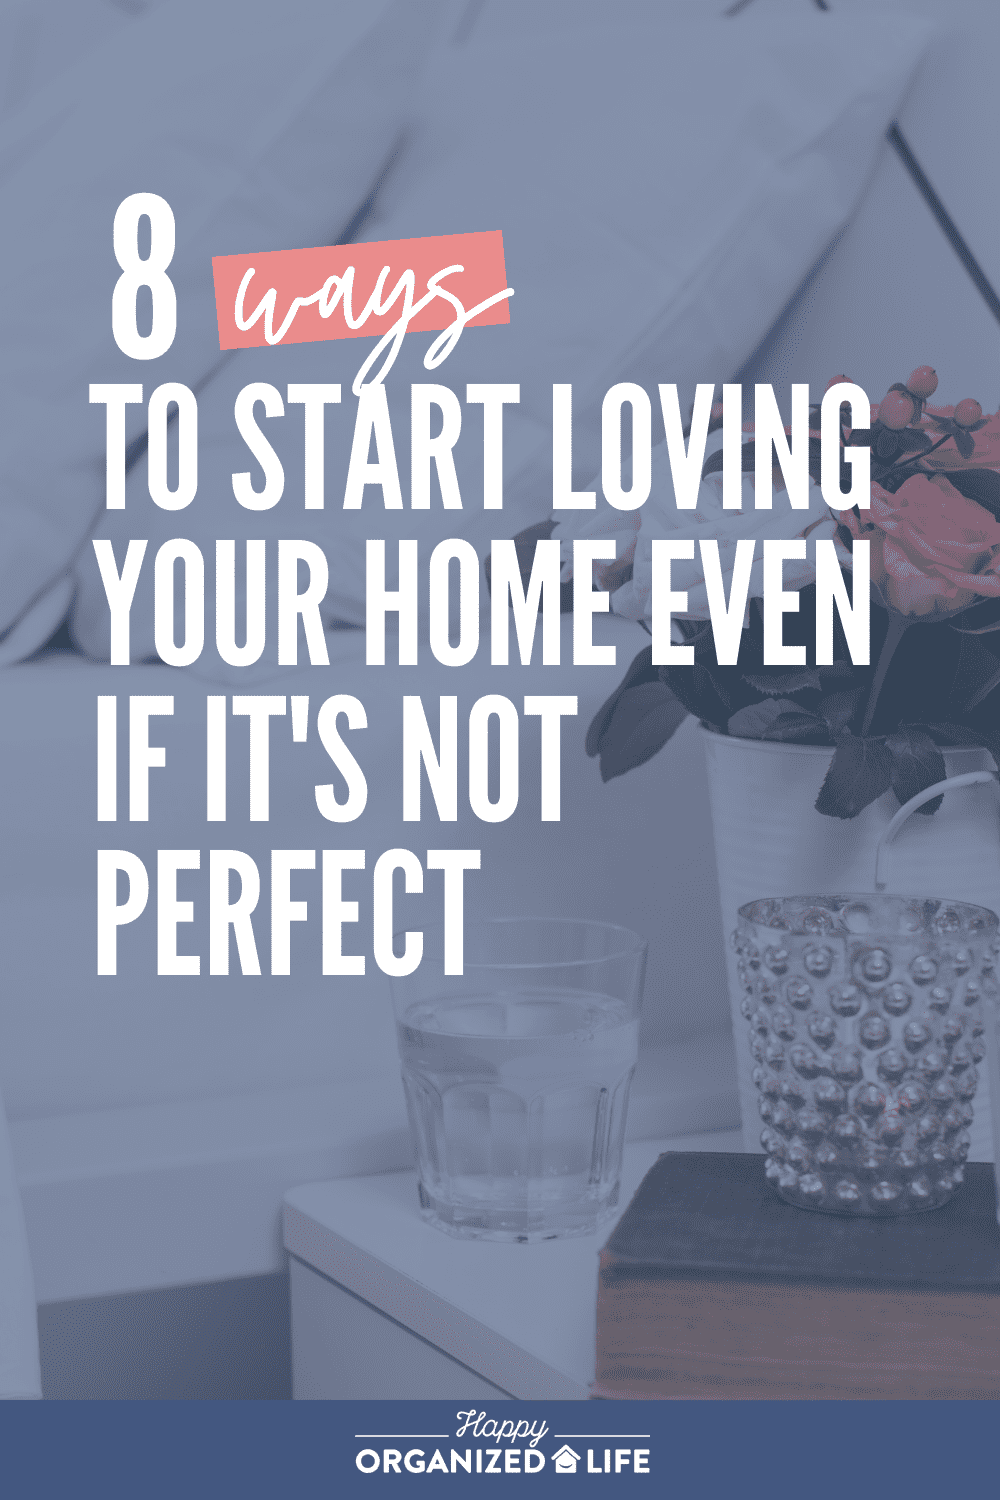 8 ways to start loving your home even if it's not perfect